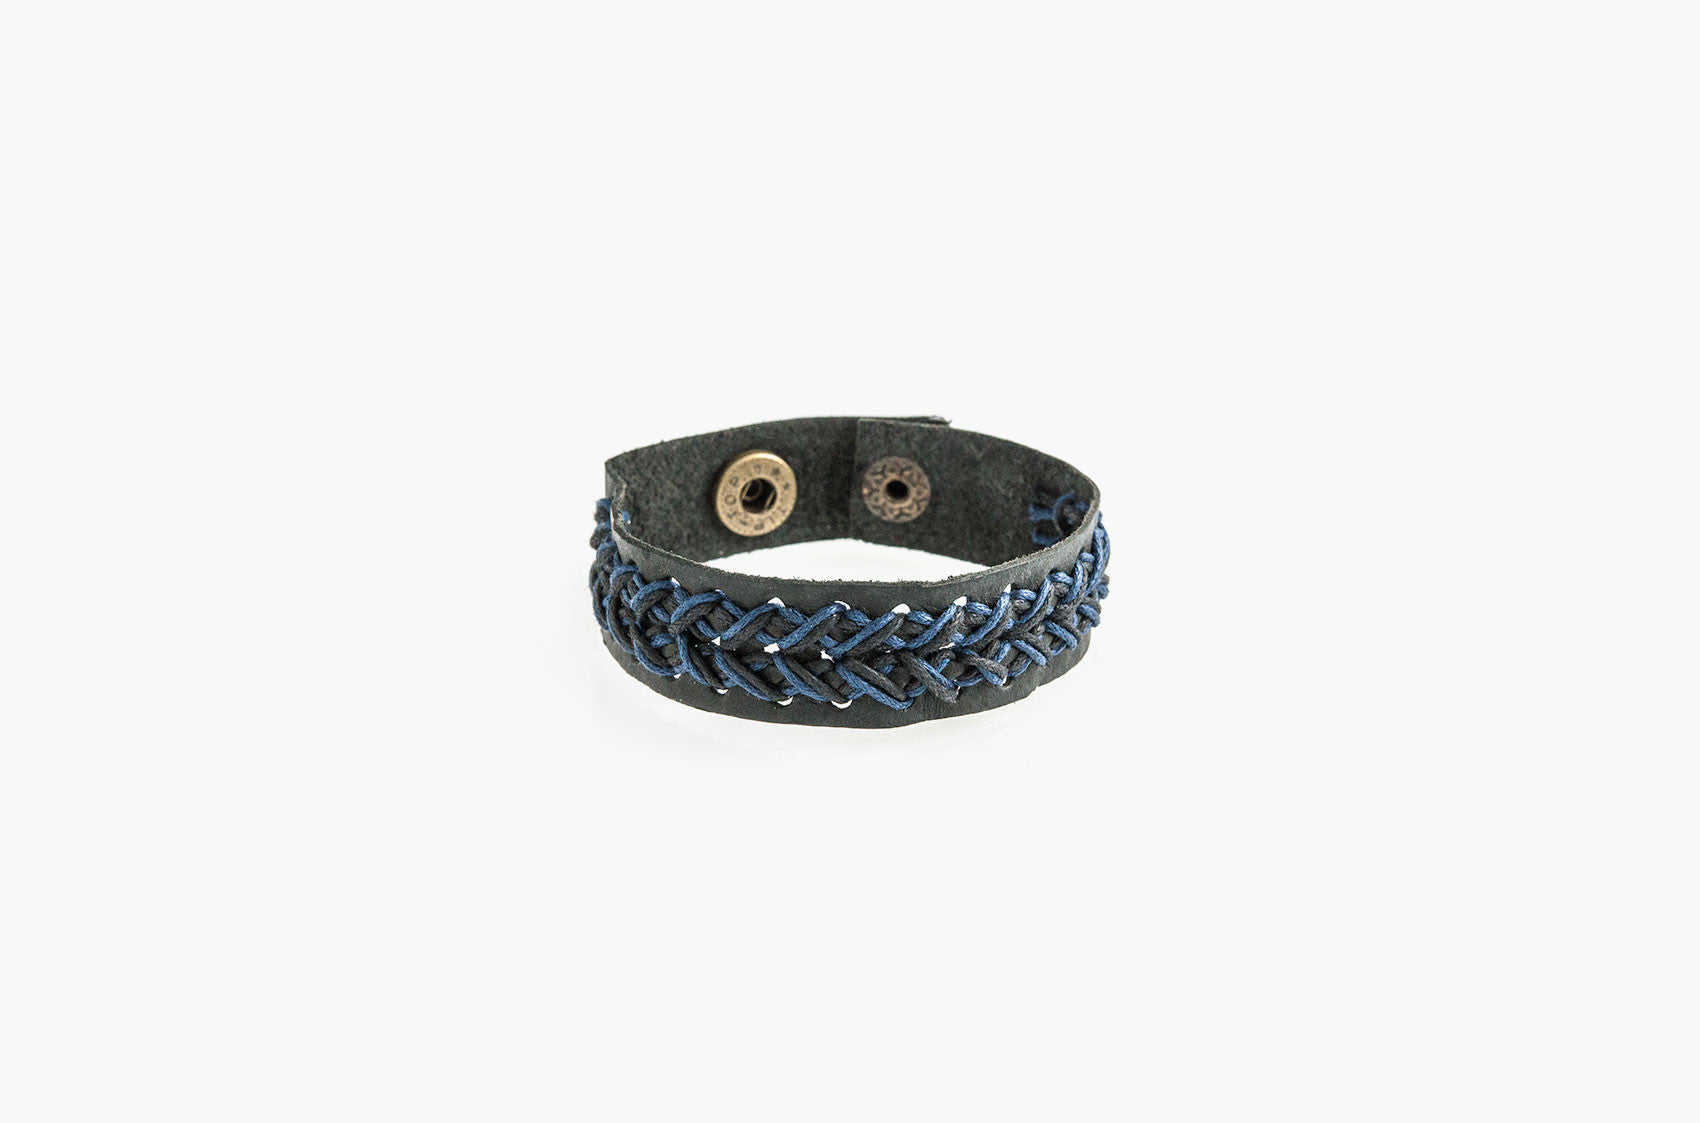 Black leather and blue cord stitched bracelet